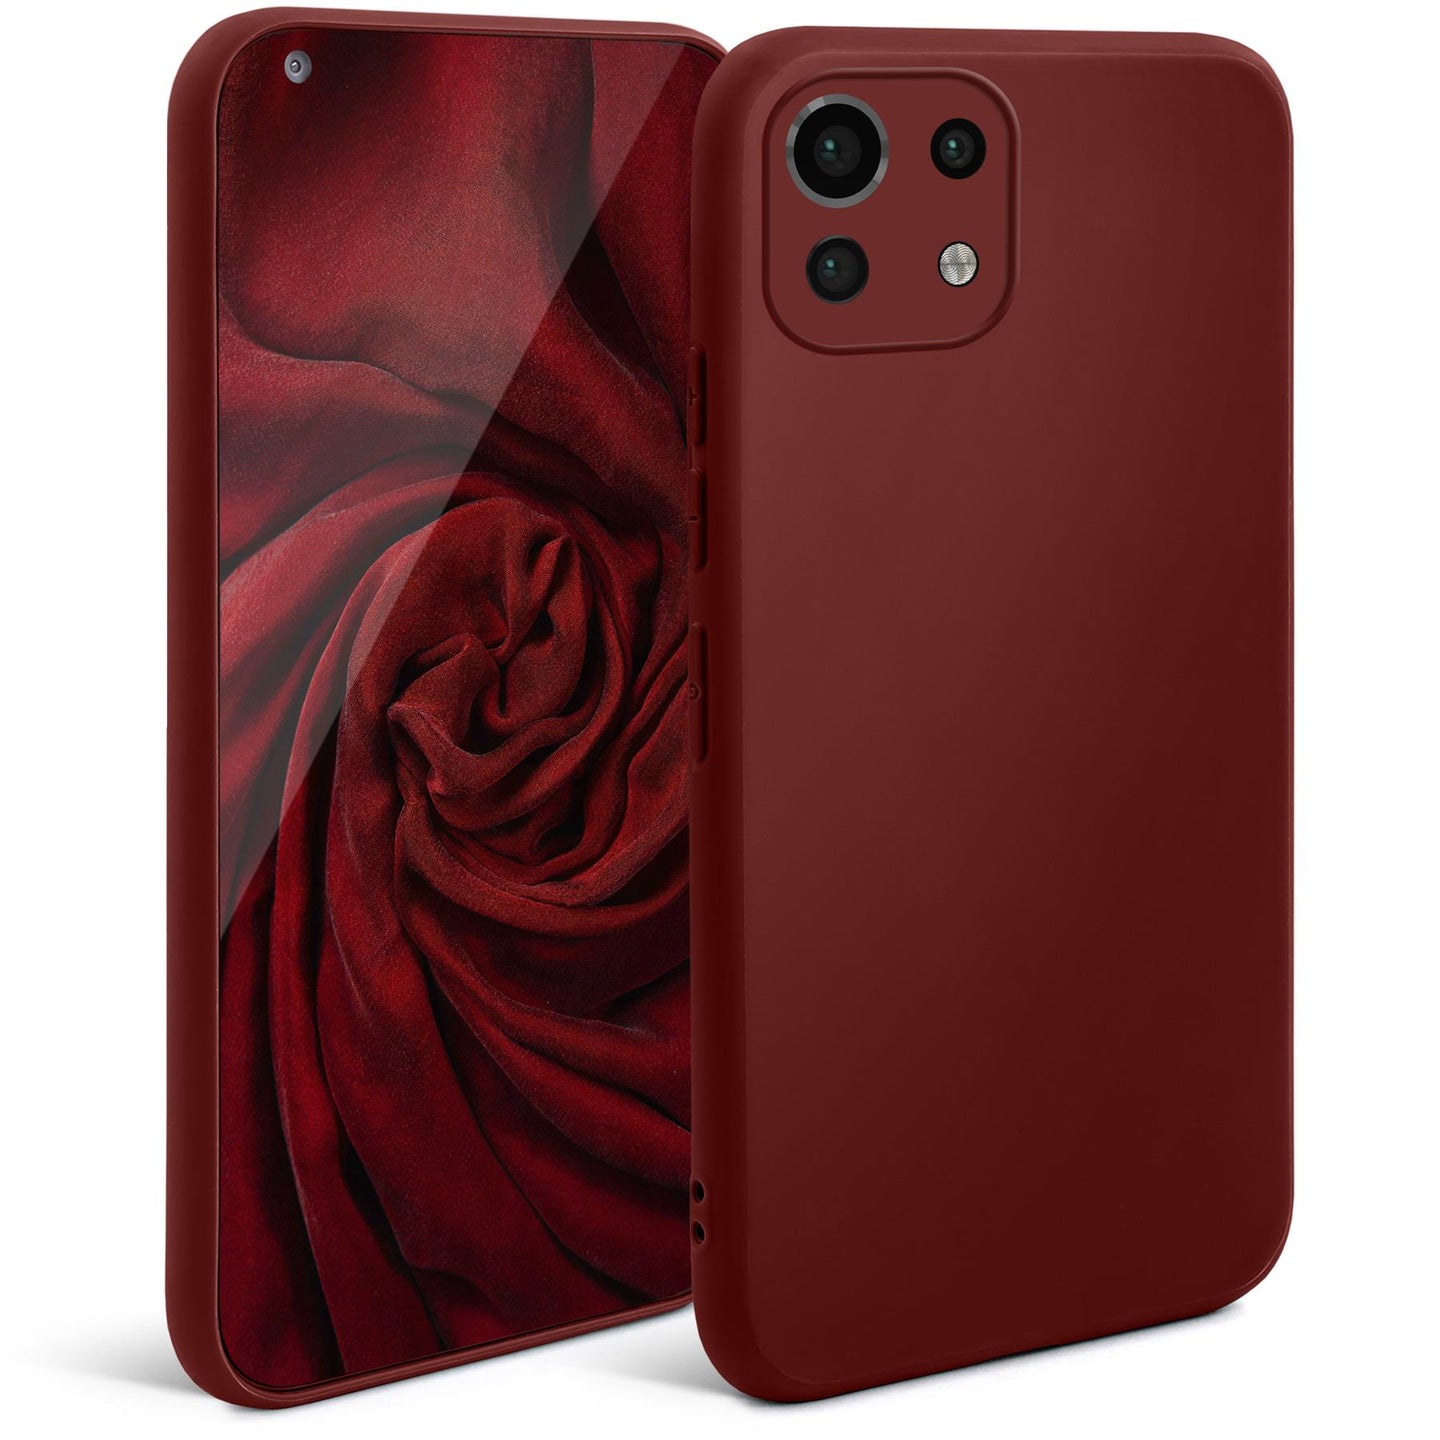 Moozy Minimalist Series Silicone Case for Xiaomi Mi 11 Lite 5G and 4G, Wine Red - Matte Finish Lightweight Mobile Phone Case Slim Soft Protective